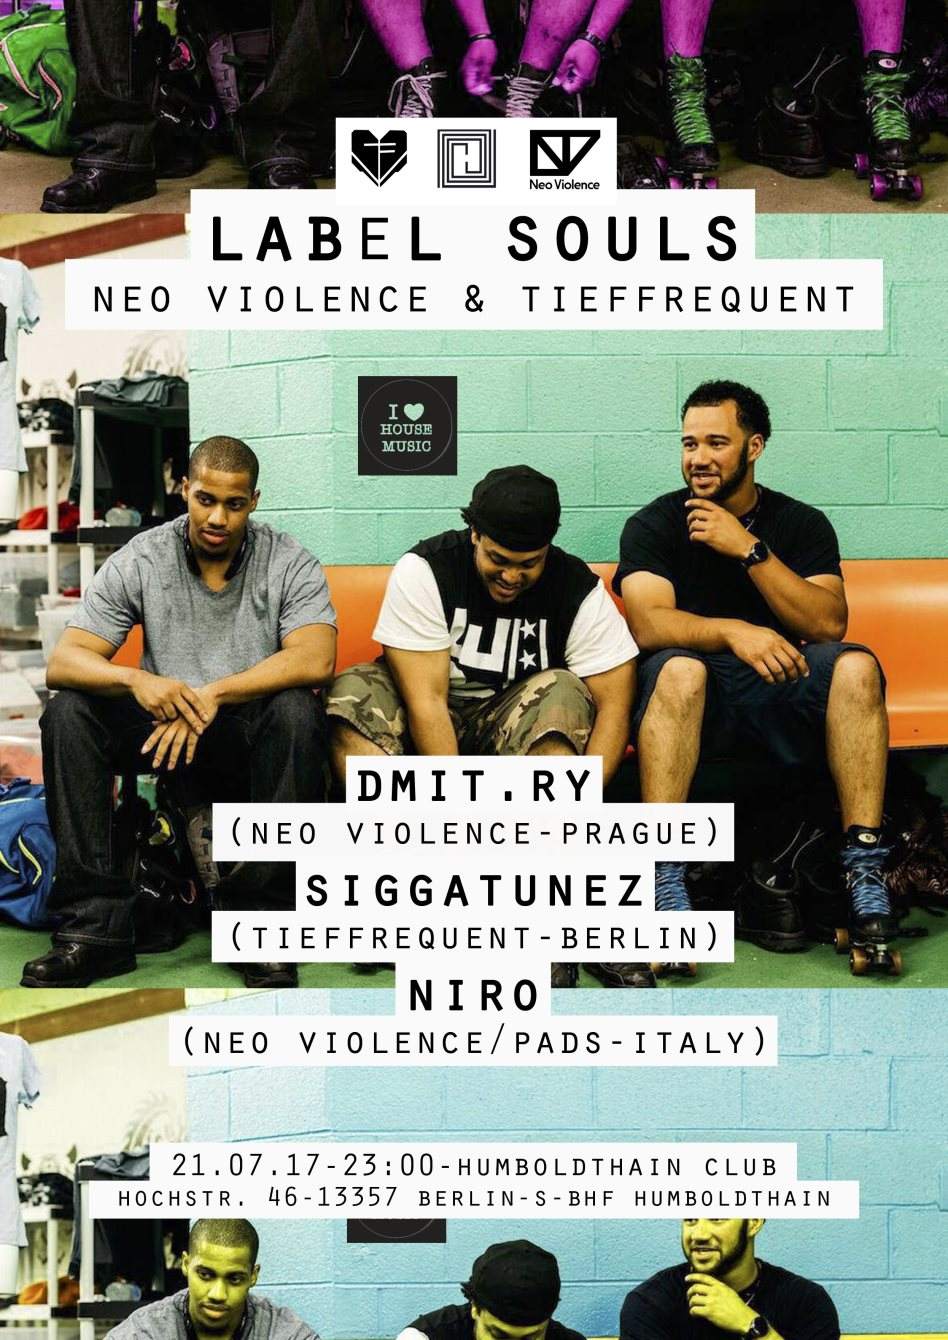 Label Souls with Neo Violence & Tieffrequent - フライヤー表